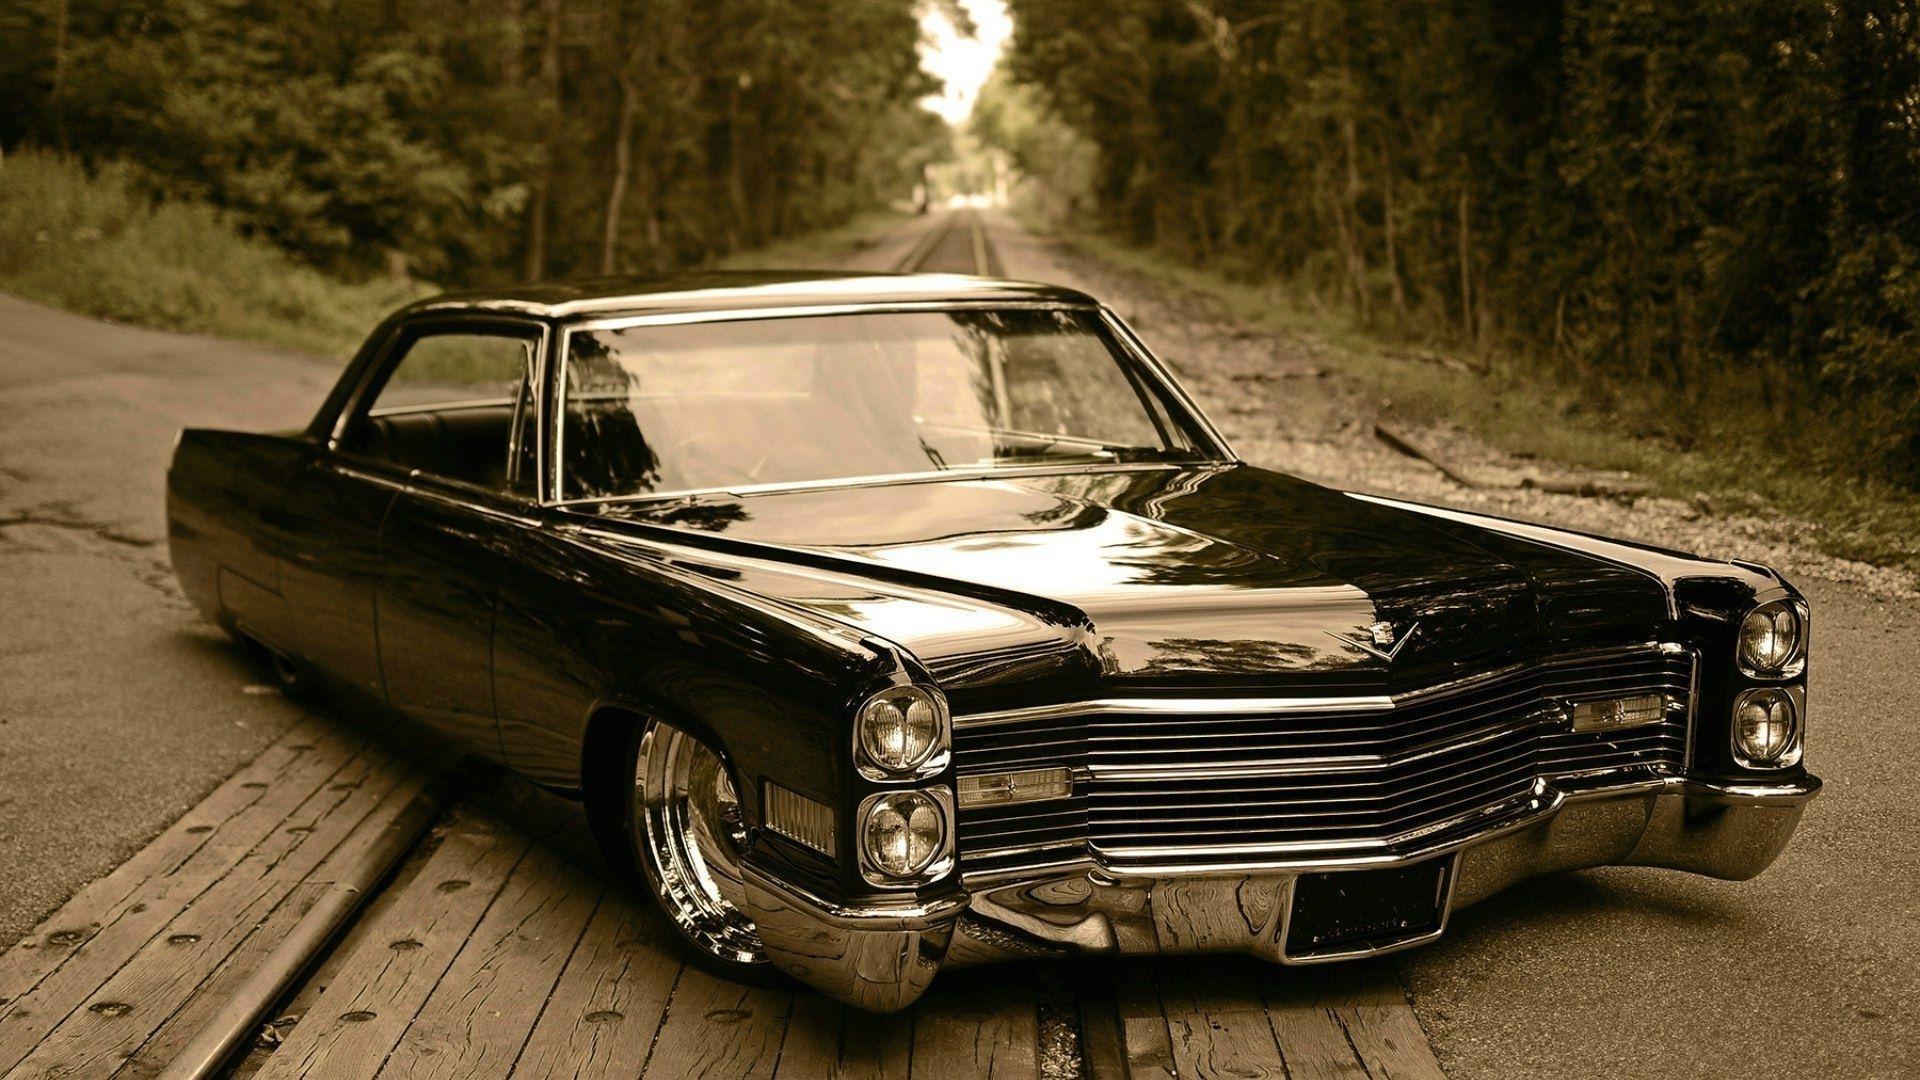 Old Cadillac Wallpaper Free Old Cadillac Background